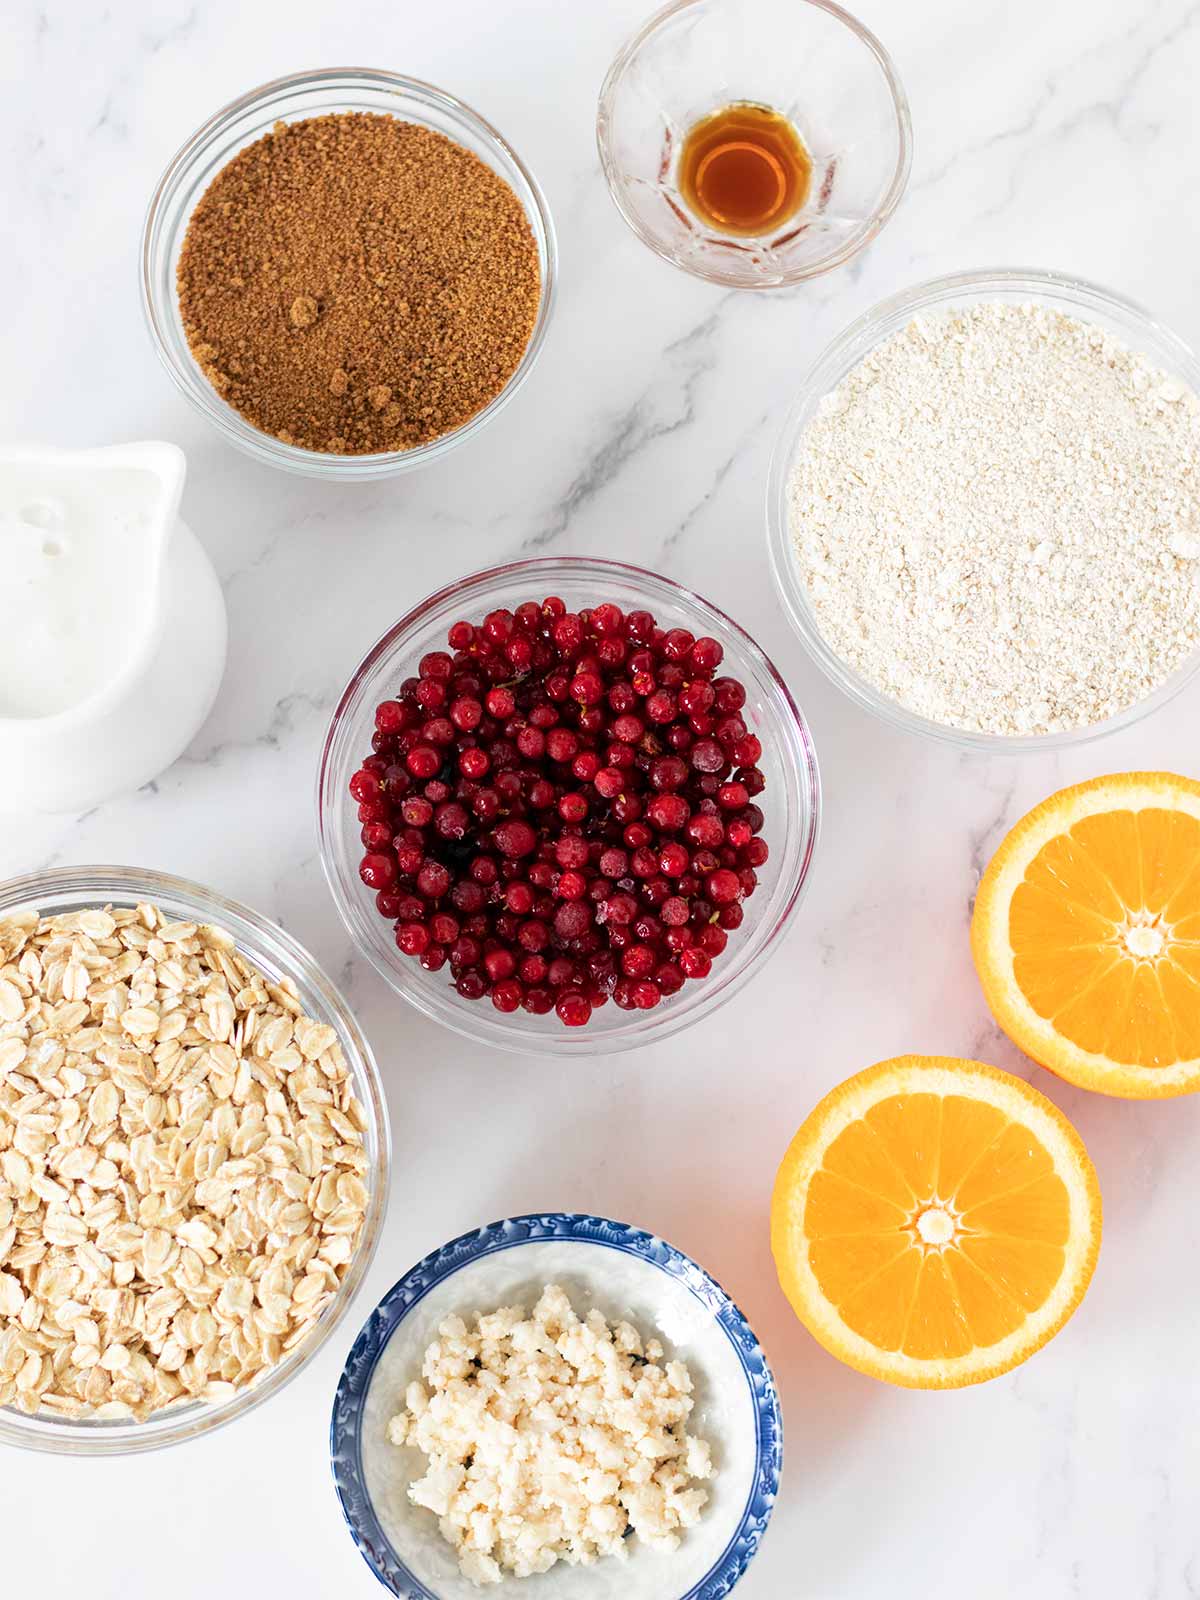 Plant-based ingredients for baking healthy oatmeal breakfast cookies without baking soda